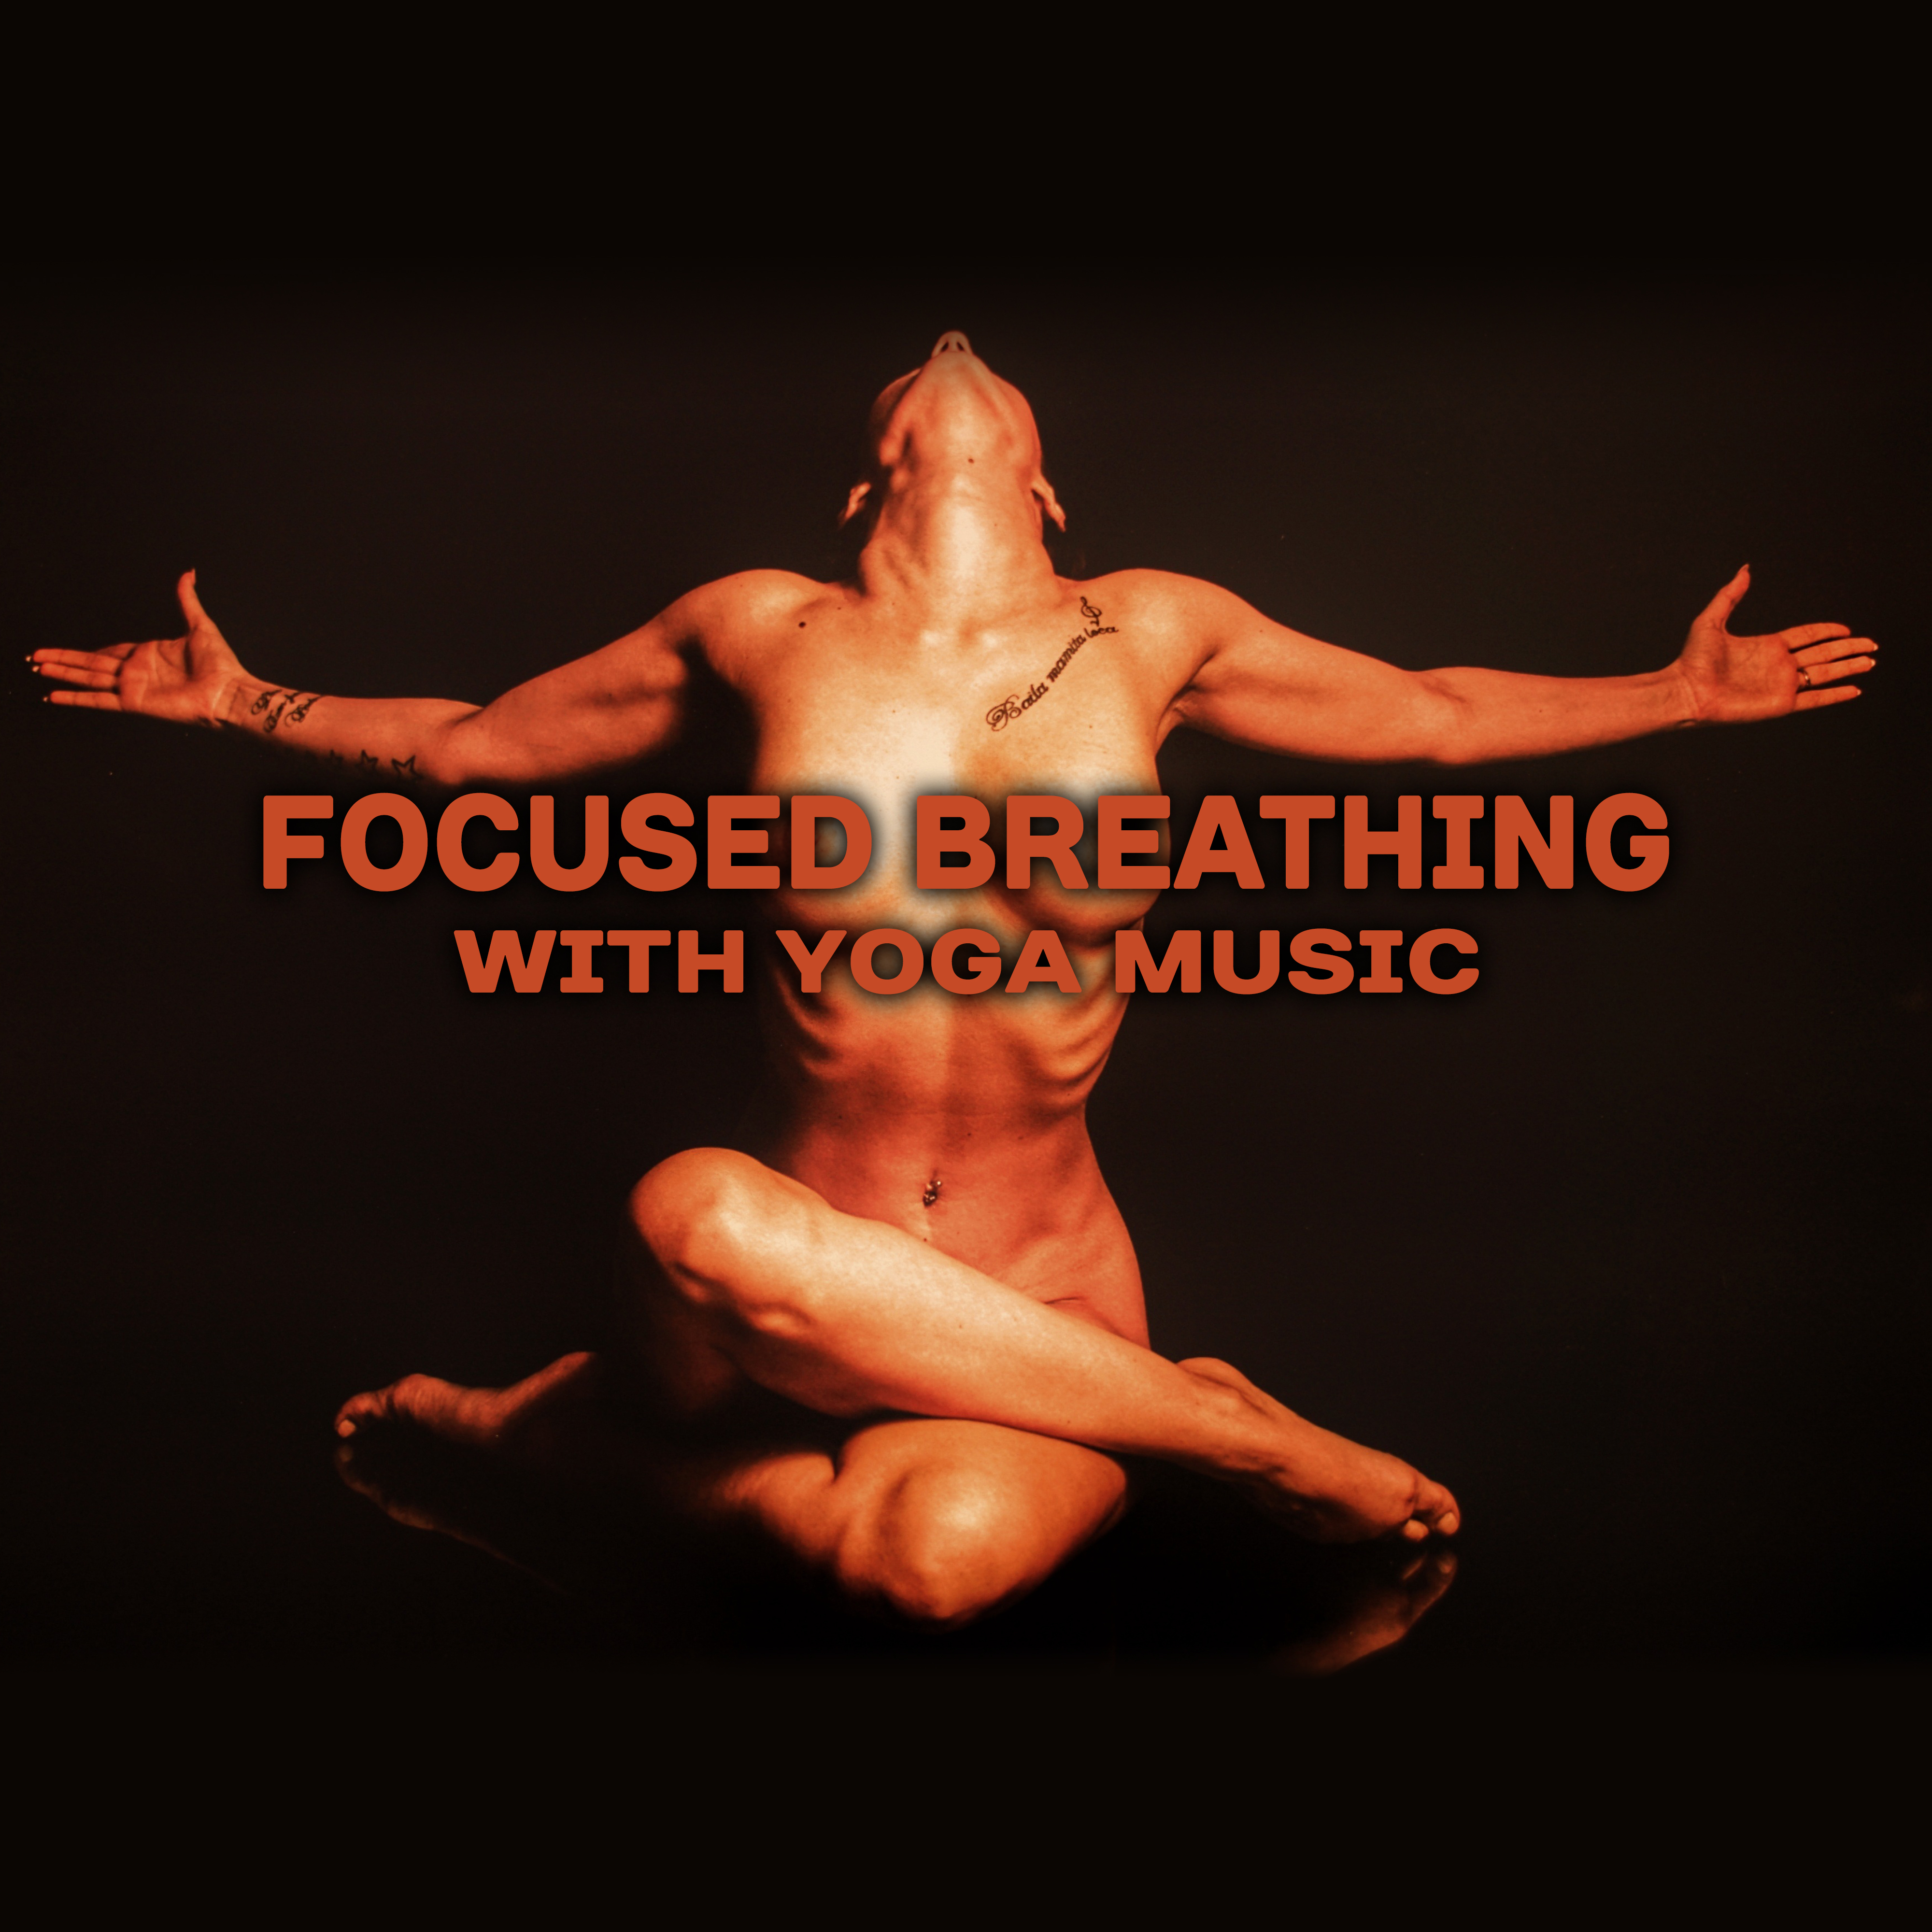 Focused Breathing with Yoga Music